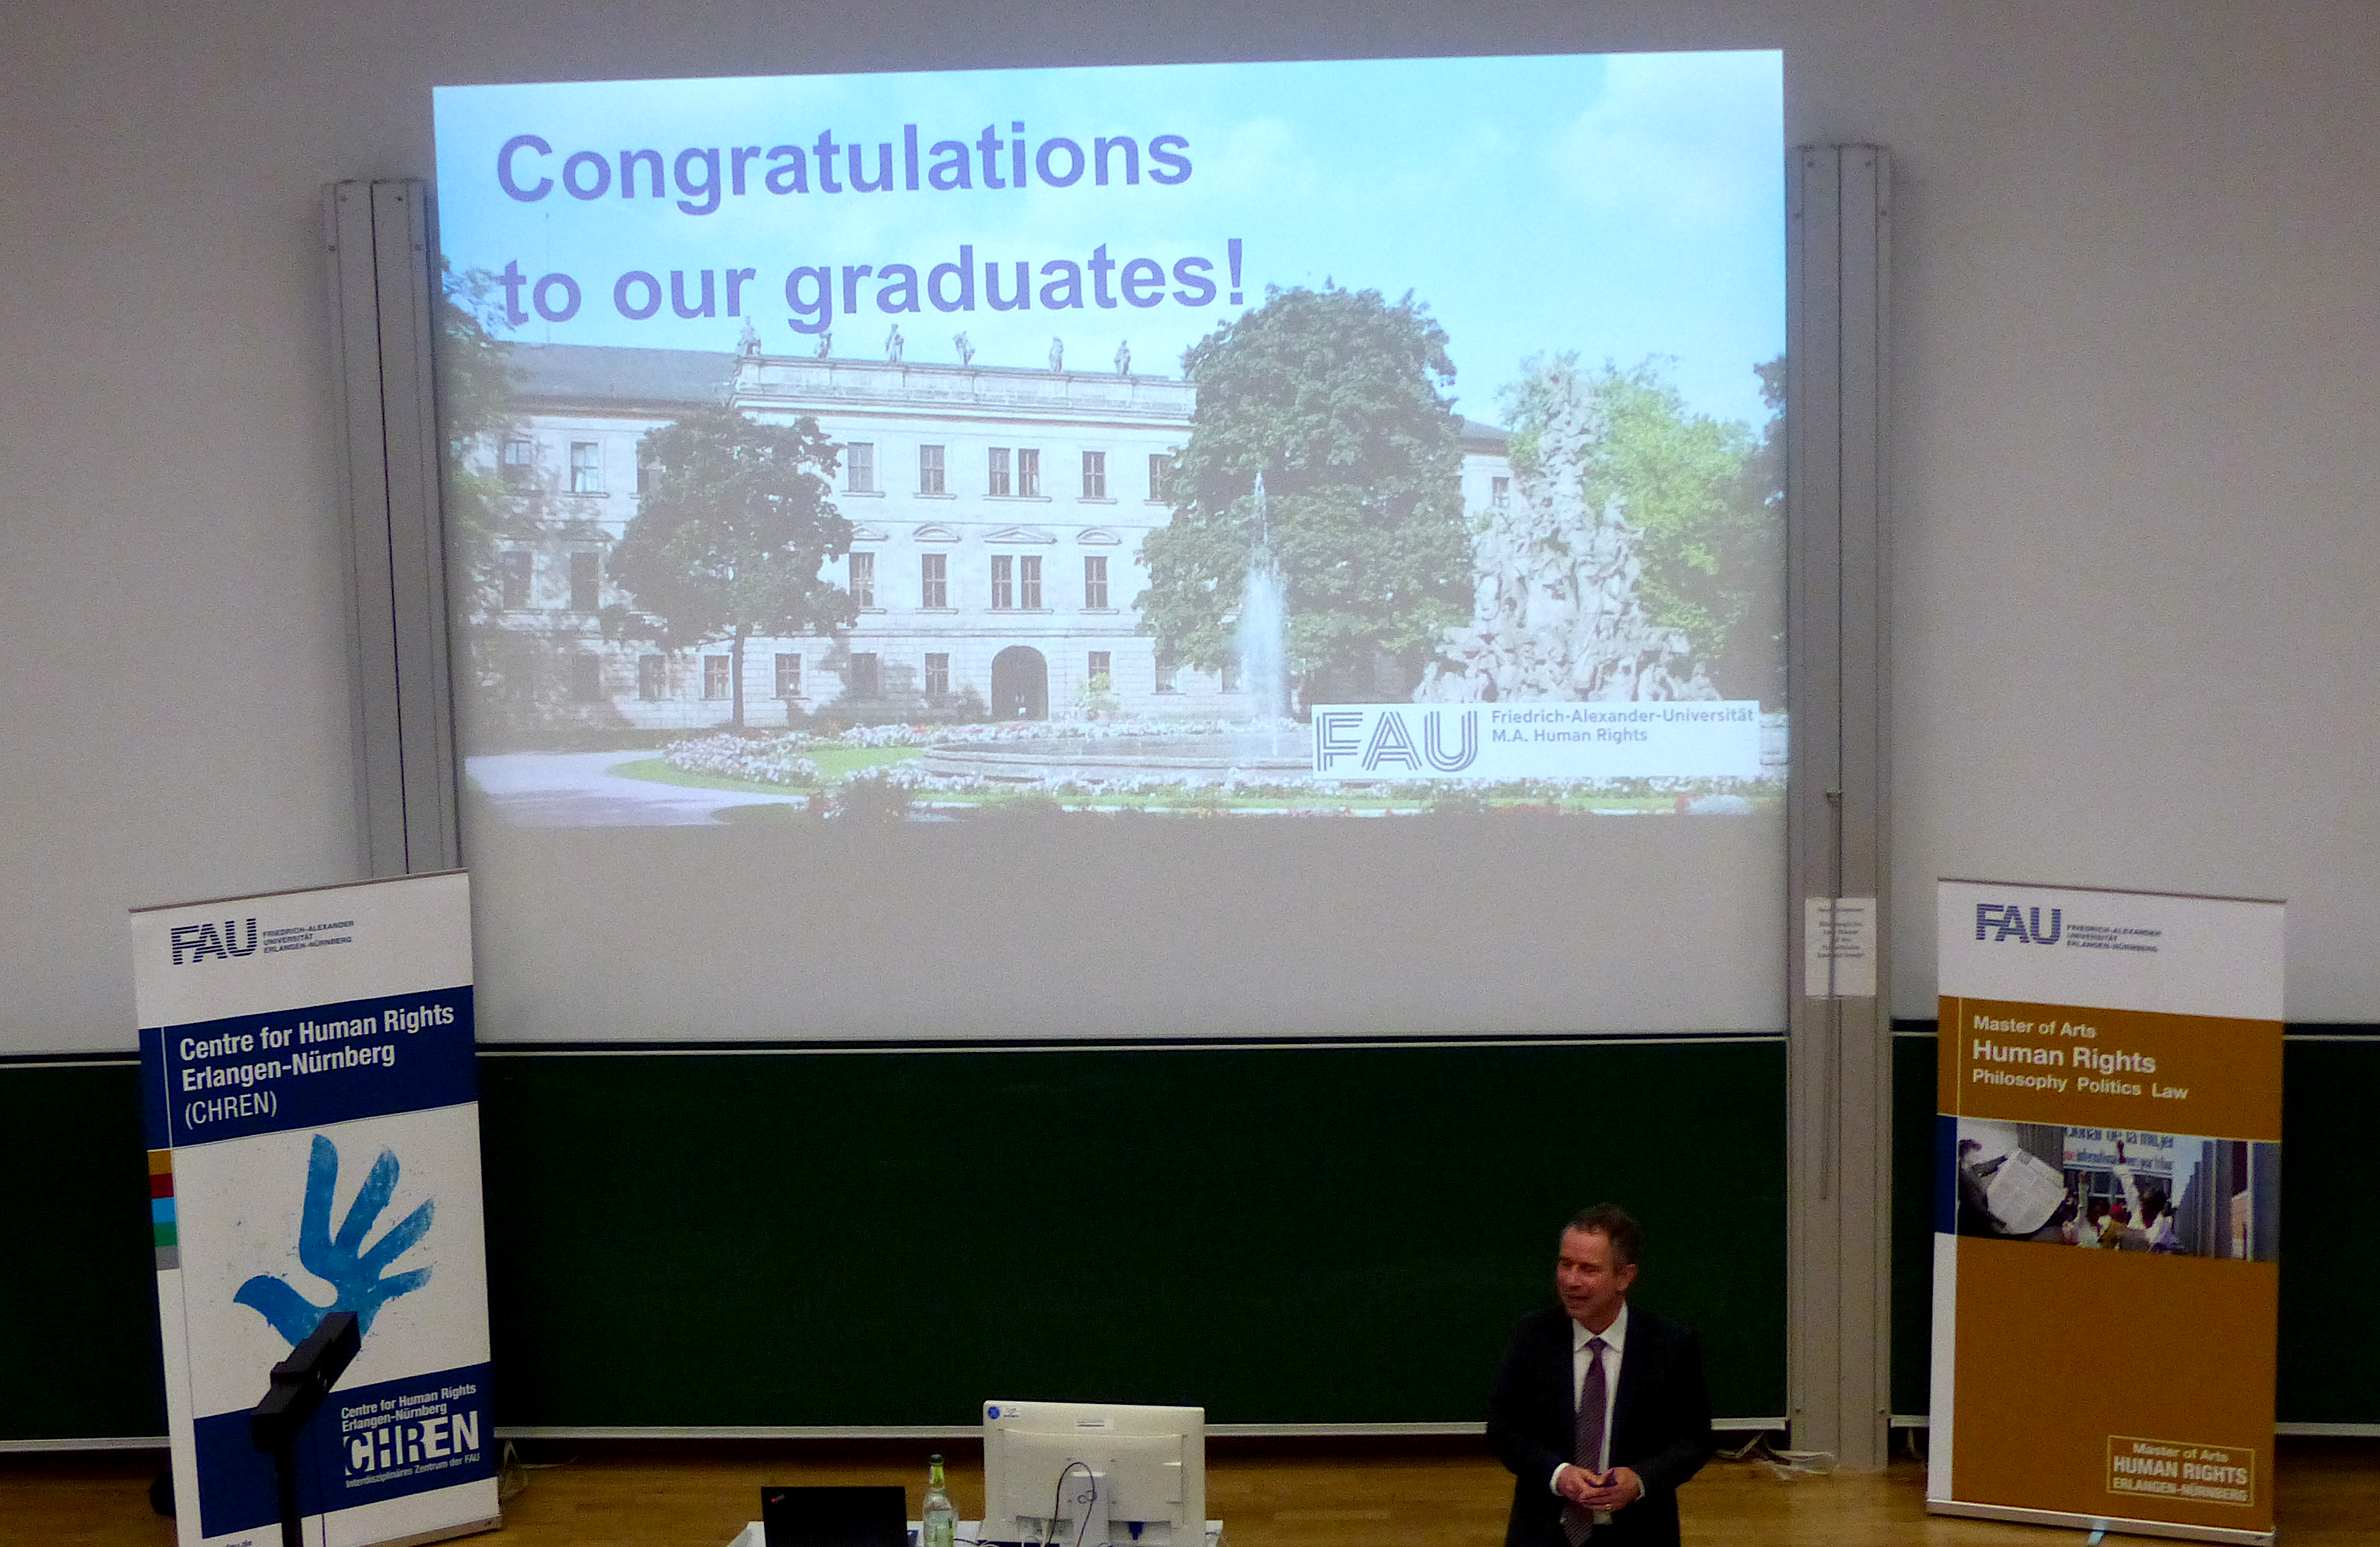 Picture of Prof. Krajewski at the graduation ceremony in front of a powerpoint "Congratulations to our graduates!"